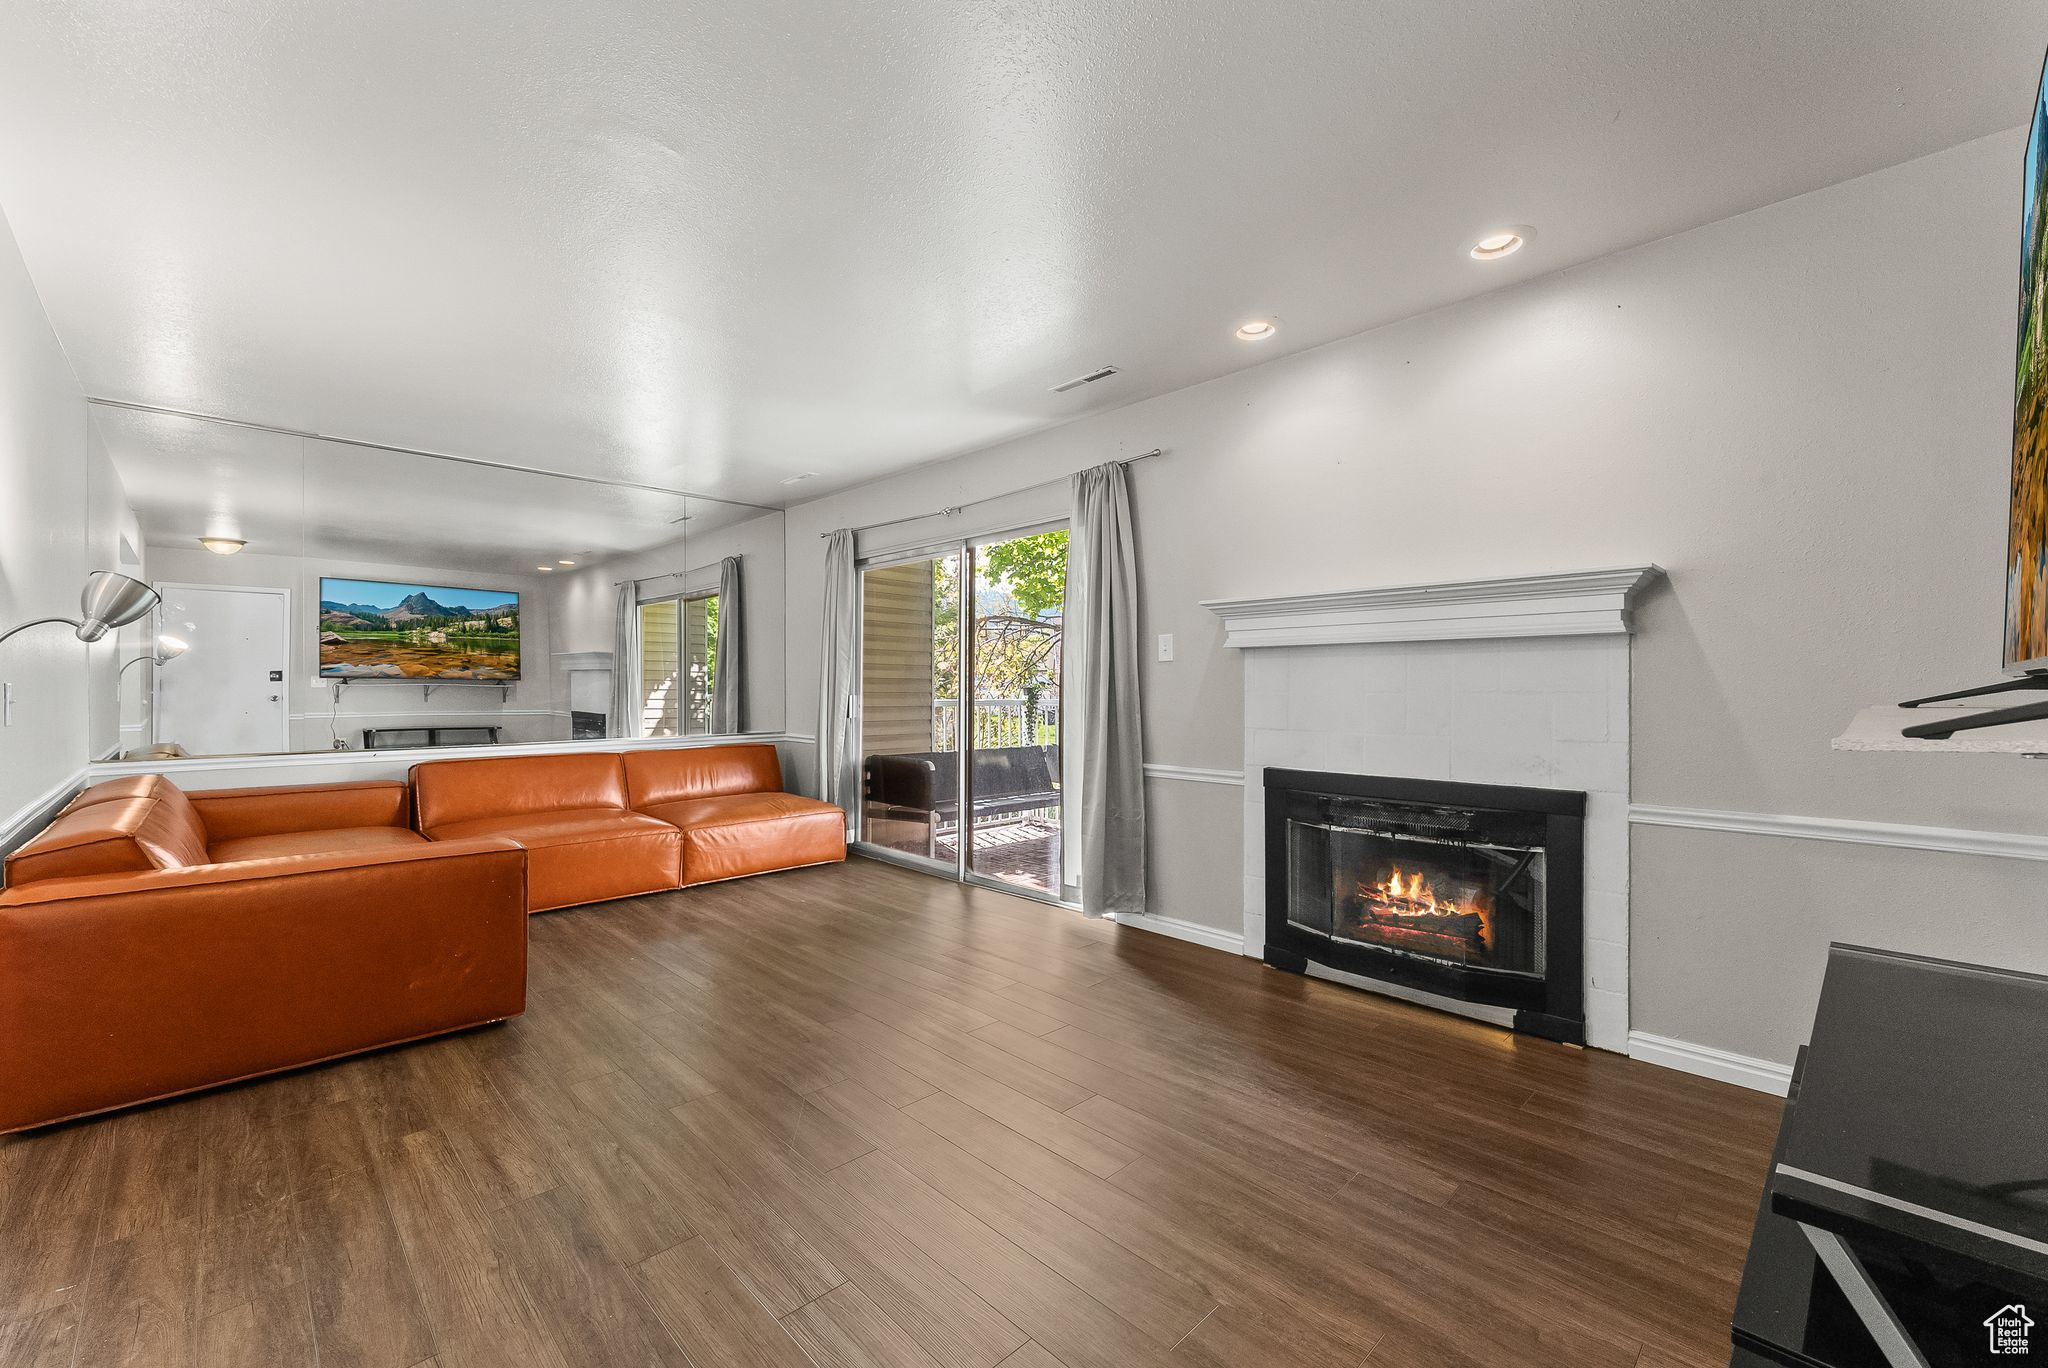 Living room featuring dark hardwood / wood-style flooring and a tiled fireplace